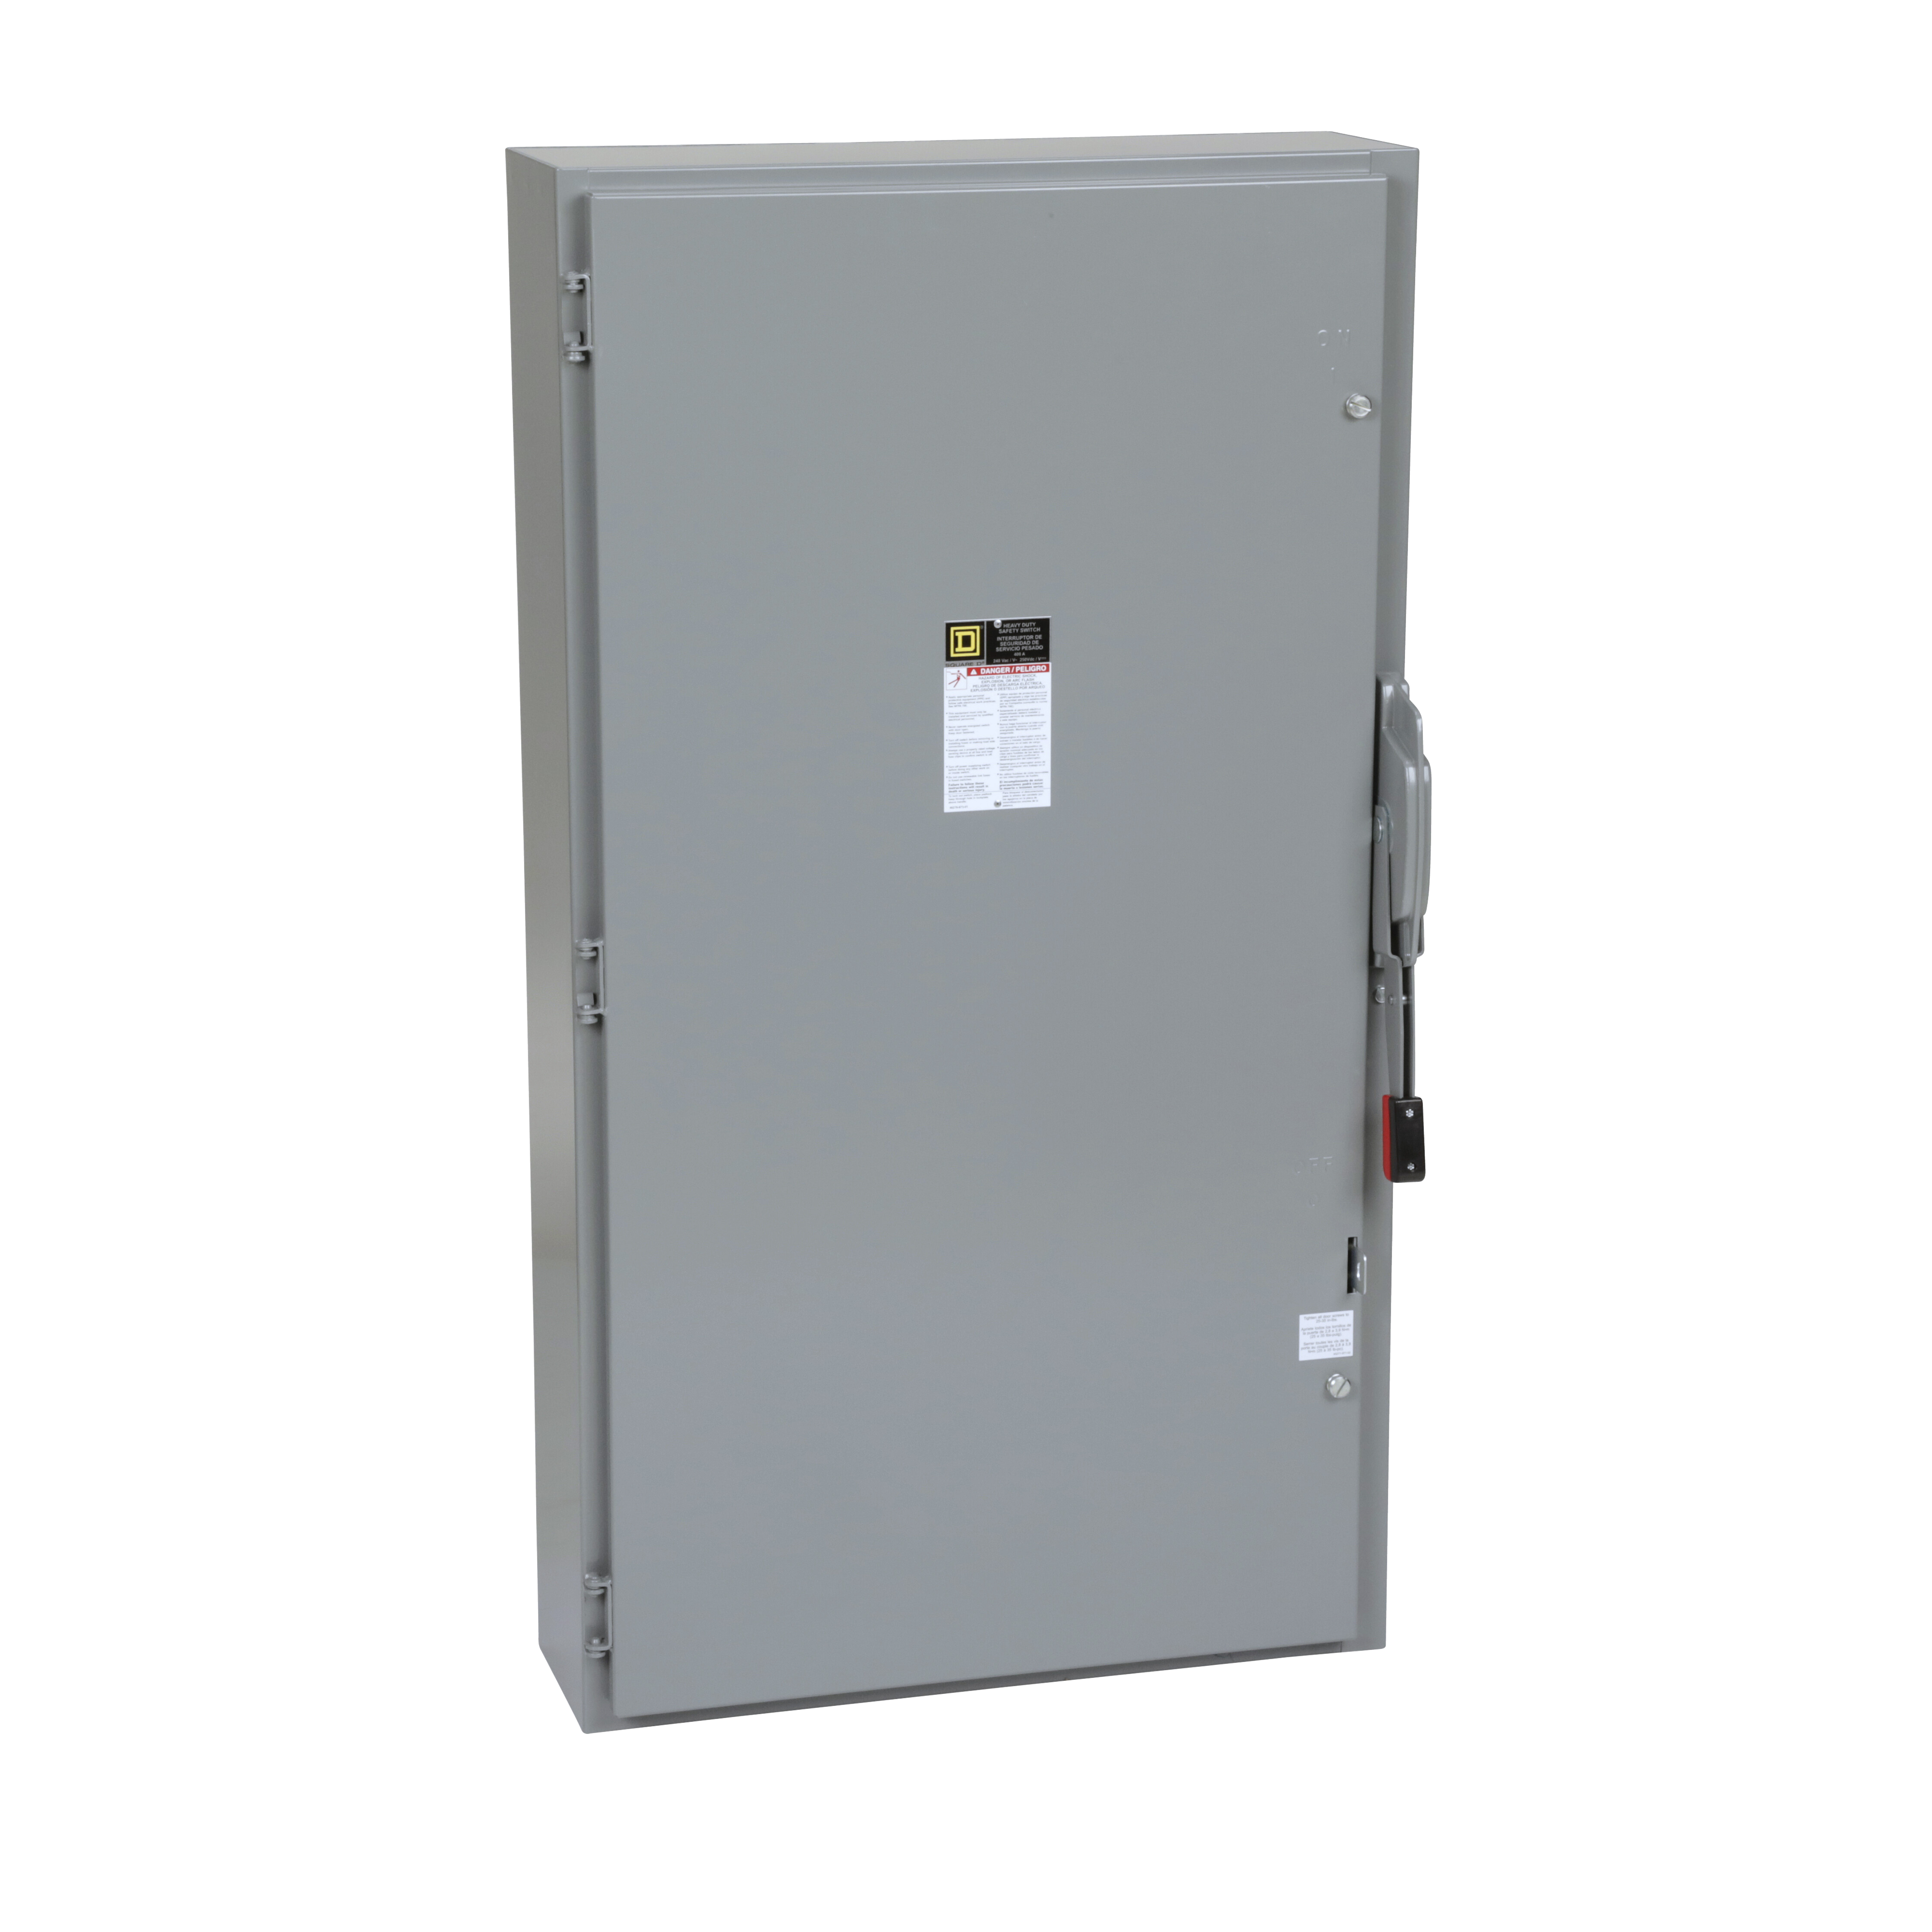 Safety switch, heavy duty, fusible, 400A, 2 pole, 125HP, 240VAC, 250VDC, neutral factory installed, NEMA1